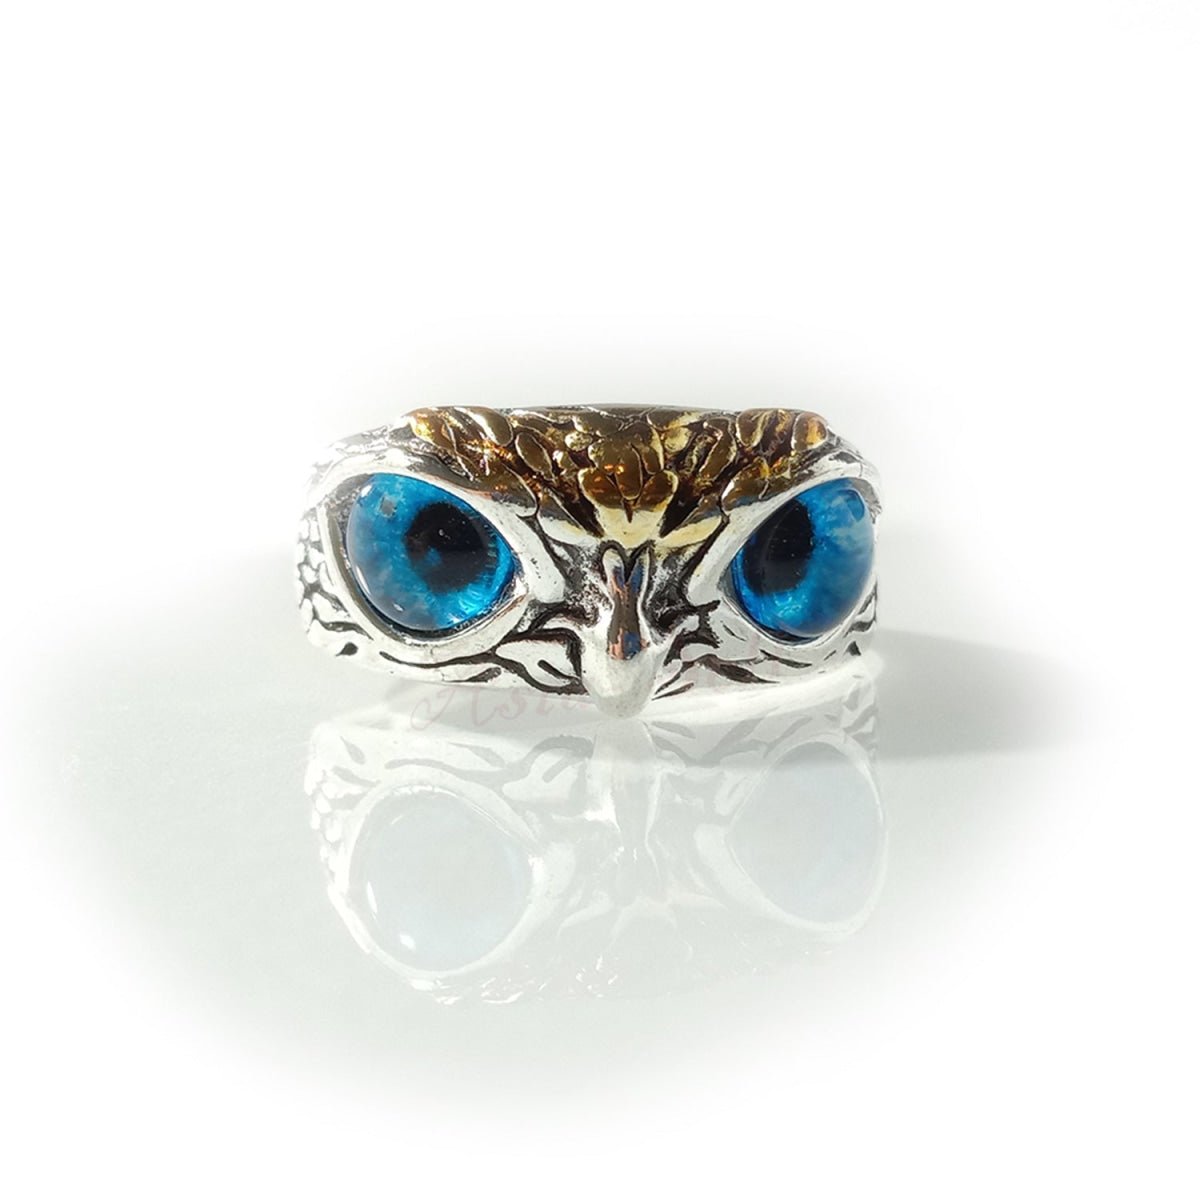 1pcs Adjustable Size Owl Ring with Rhinestone Eyes Silver Colour Alloy Fashion Jewellery - Asia Sell